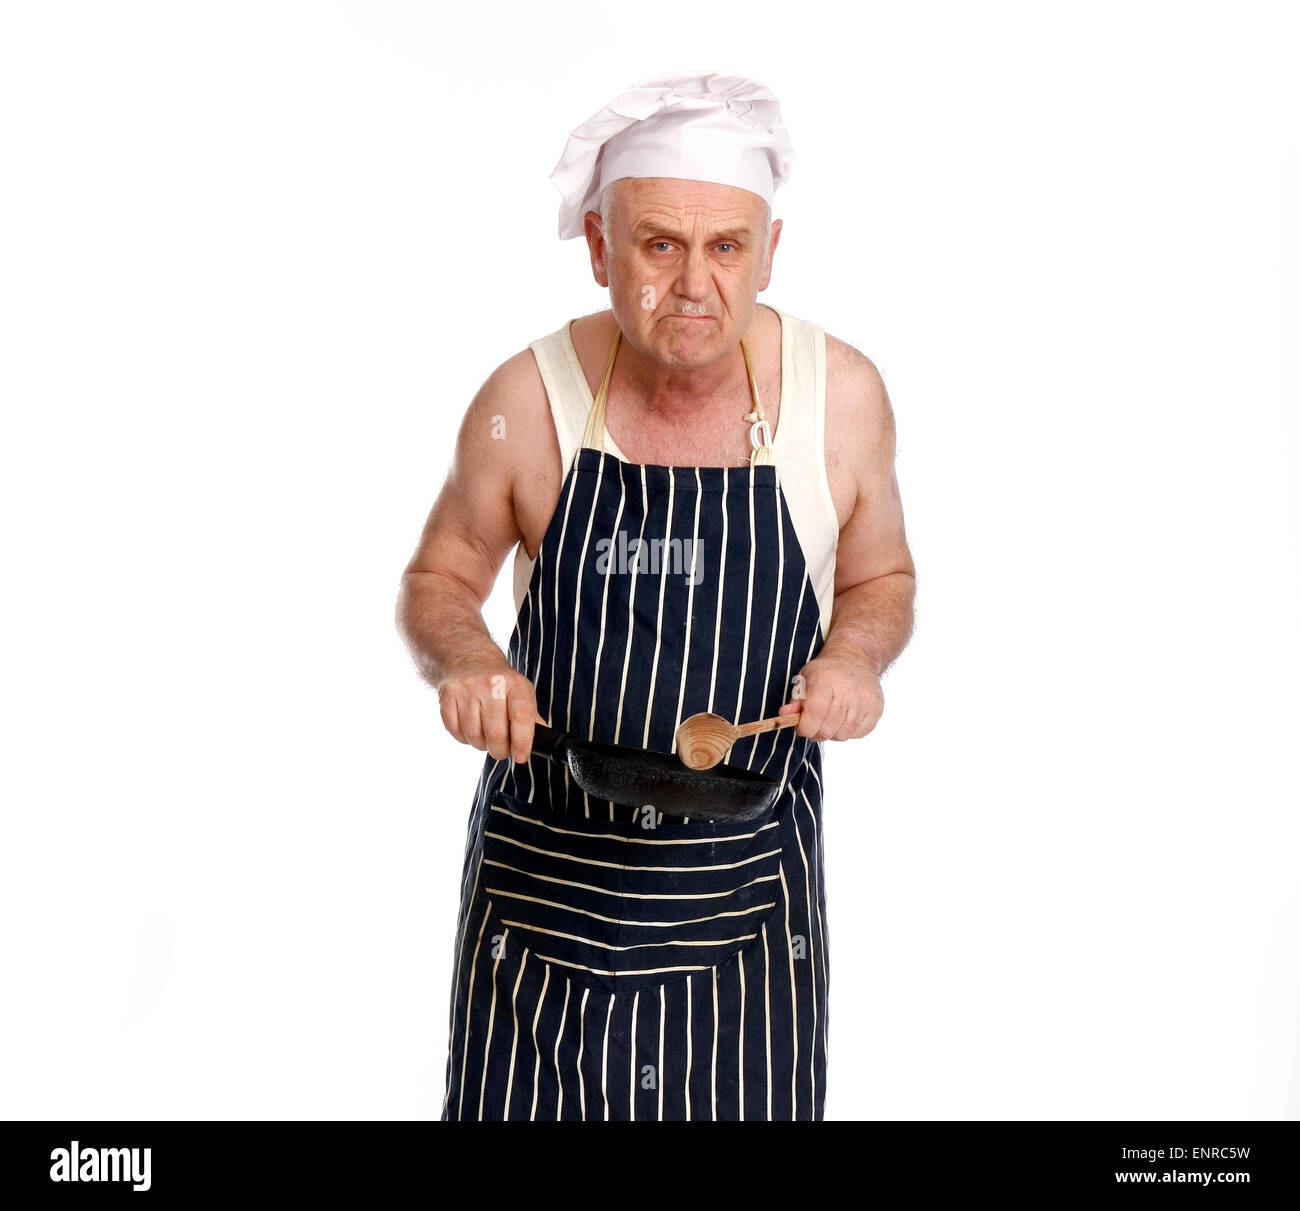 Grumpy foul tempered man as a low grade chef or cook in a greasy spoon cafe, while he cooks. Stock Photo